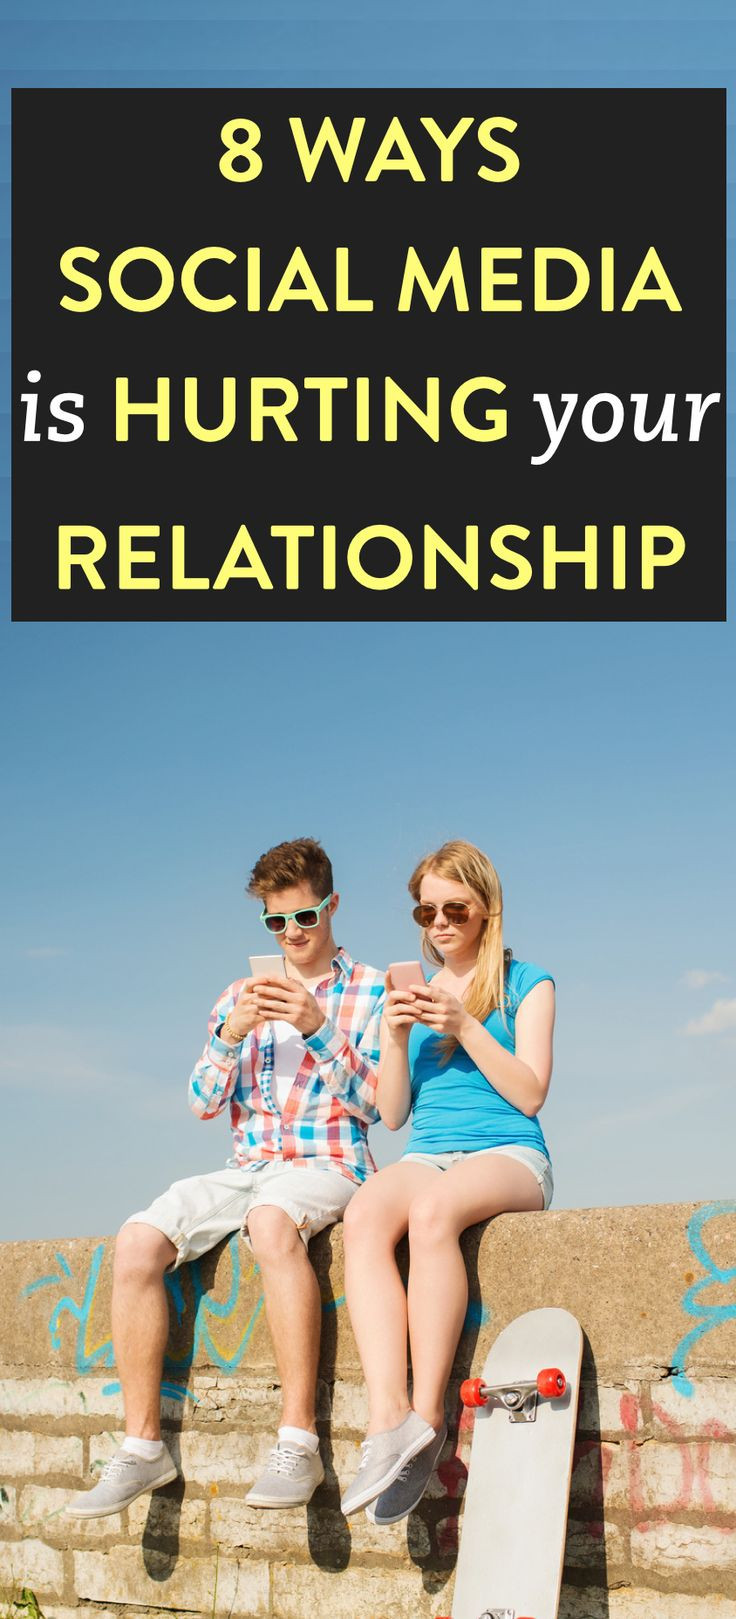 Quotes About Social Media And Relationships
 Quotes Social Media Hurting Relationships QuotesGram